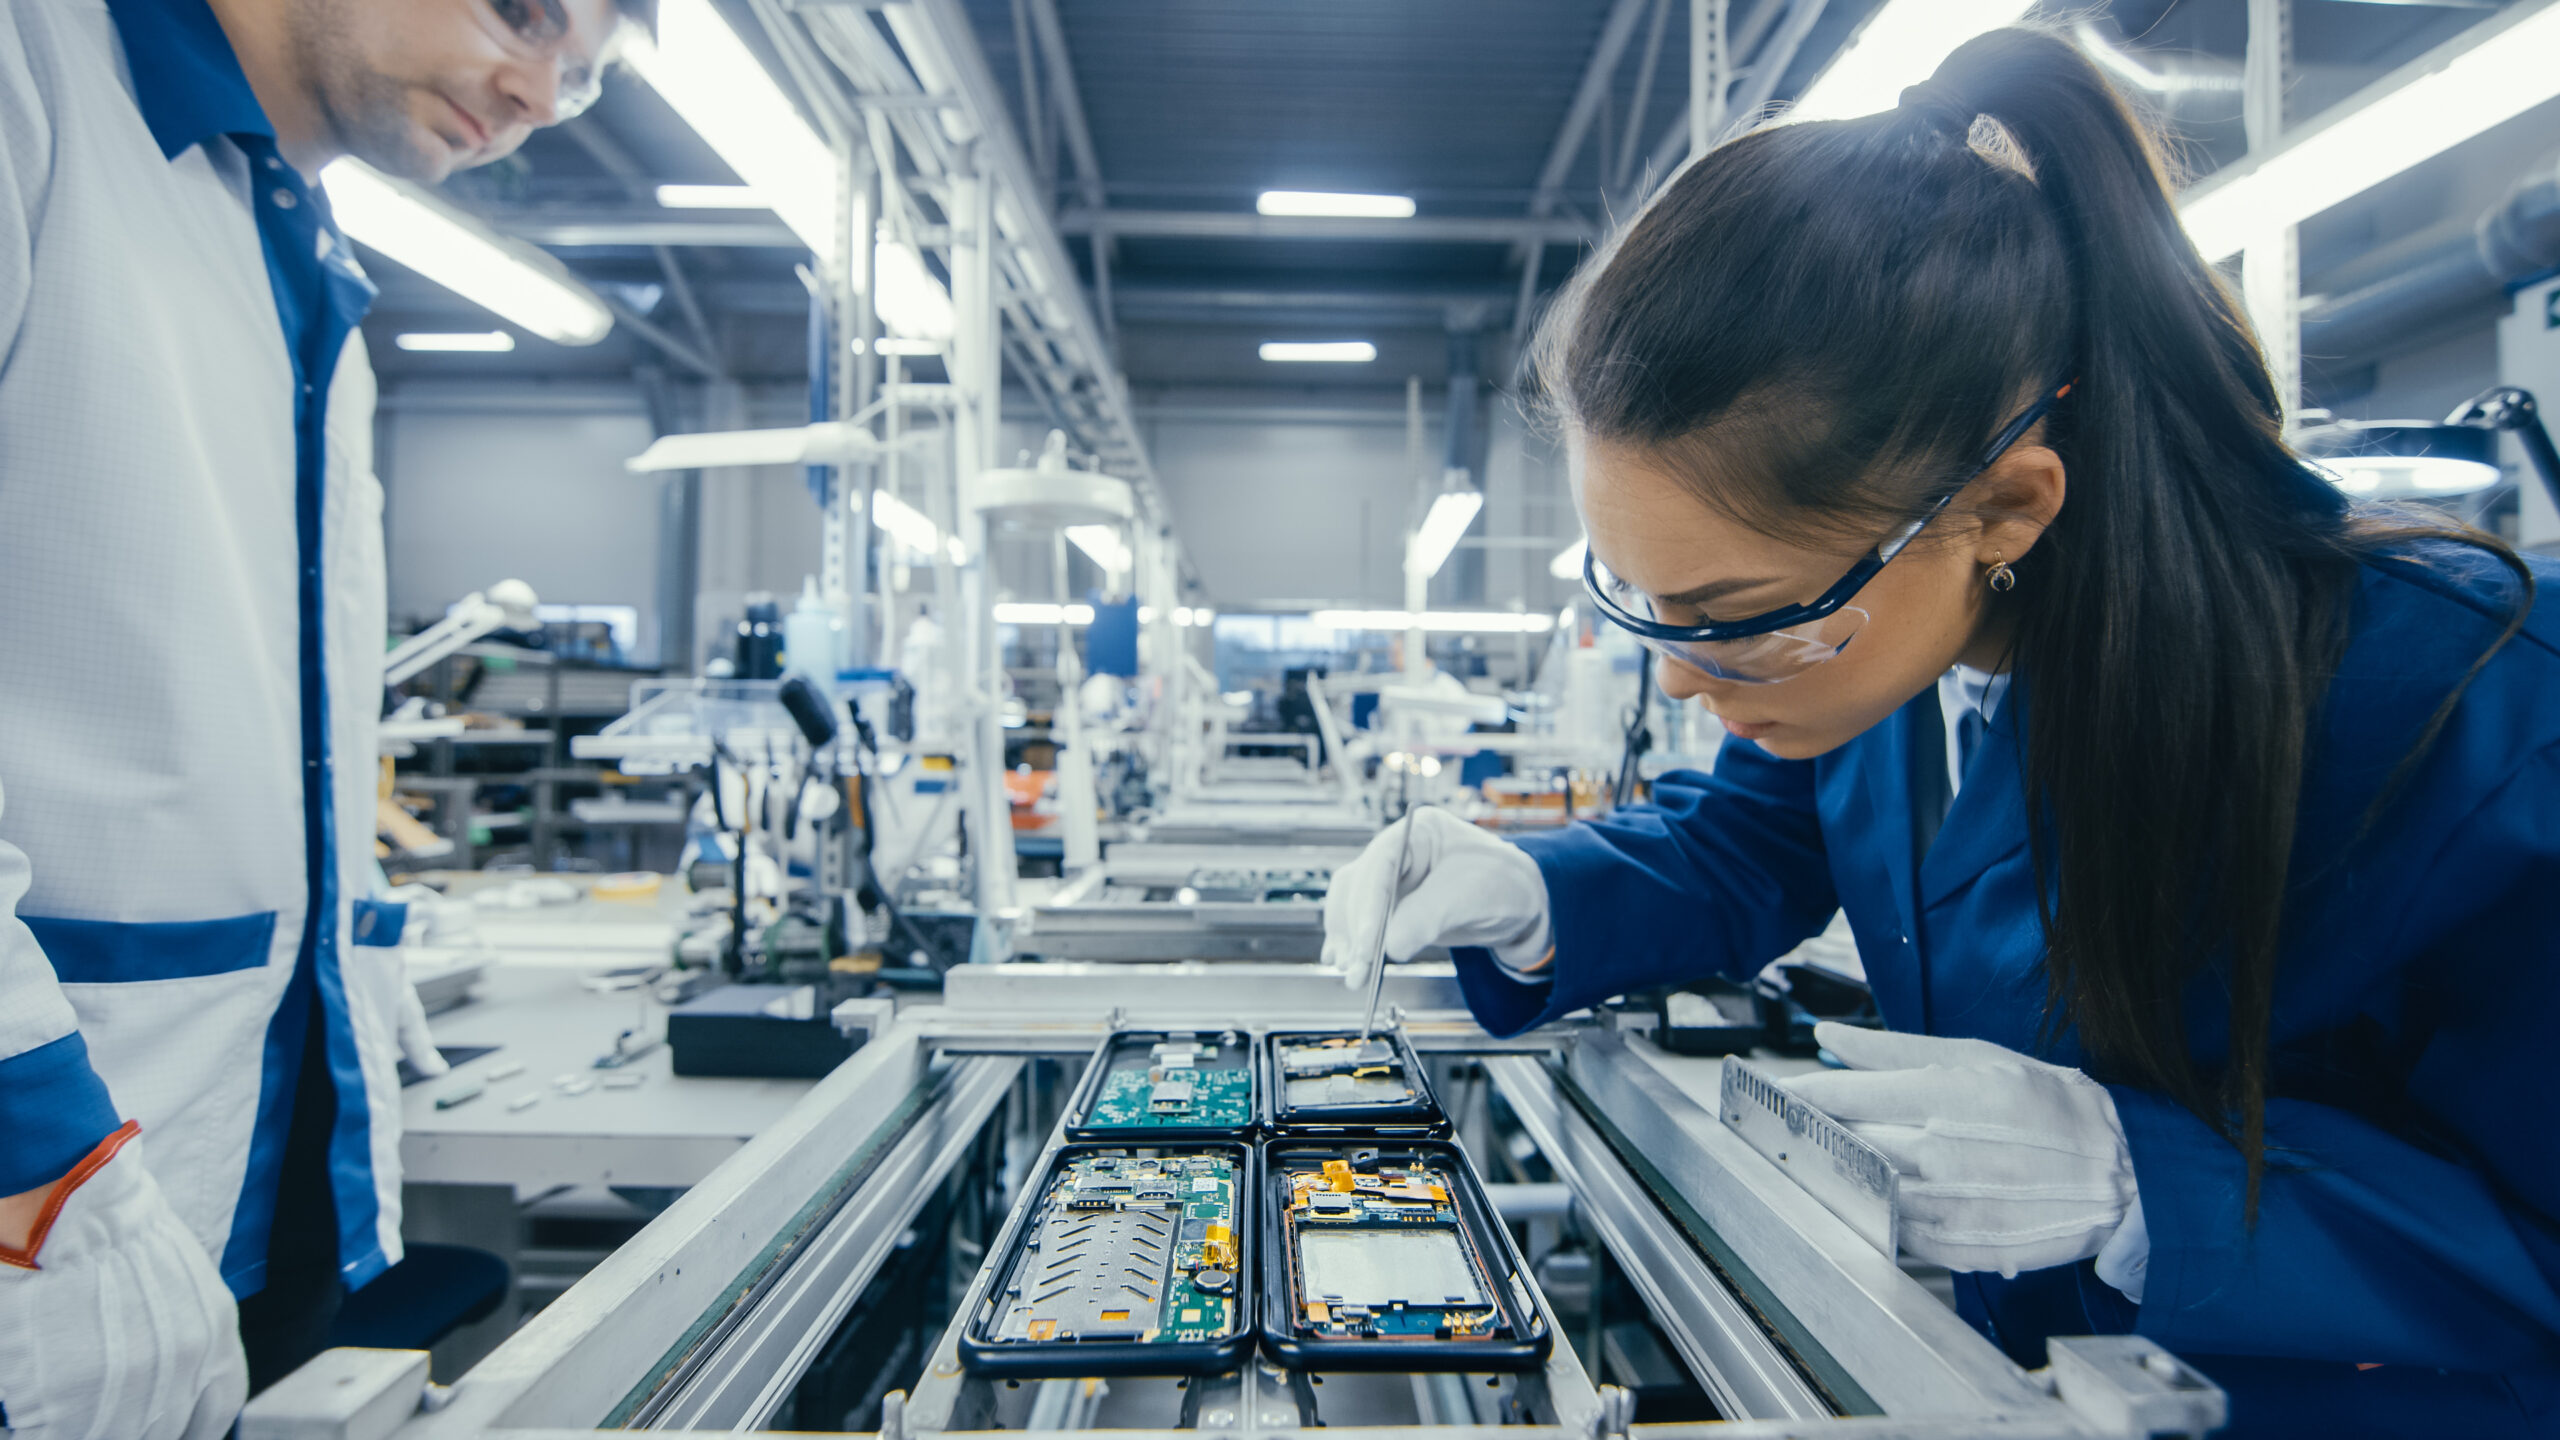 Smart manufacturing enables electronics companies to address the challenges of modern manufacturing.